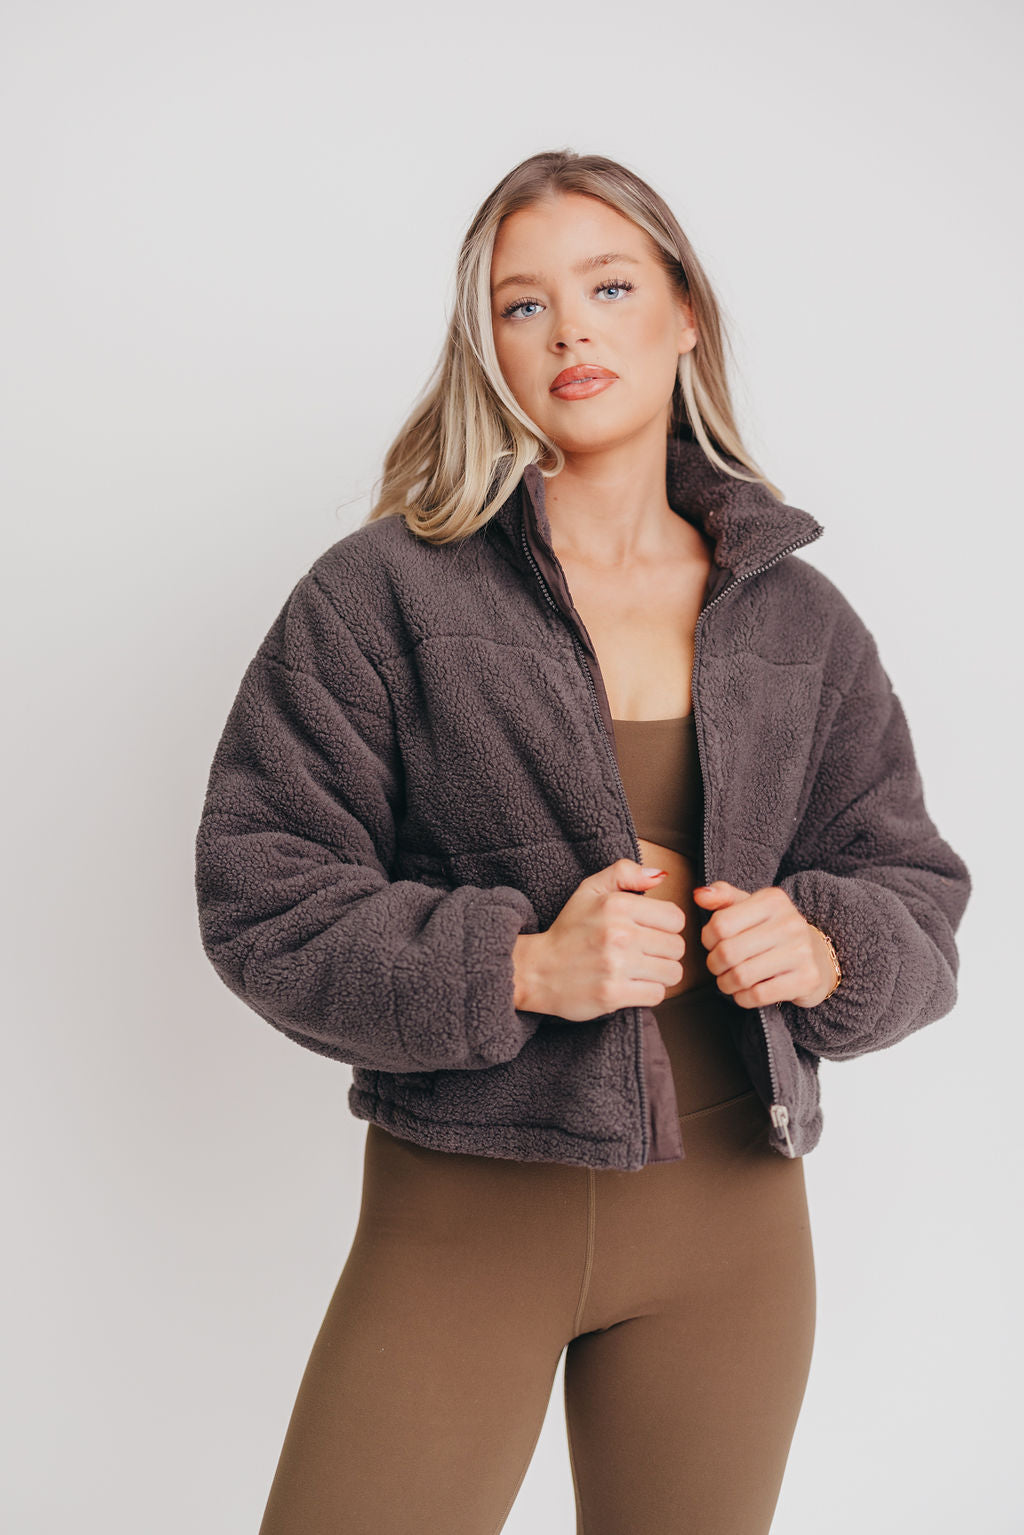 The Candice Jacket in Charcoal